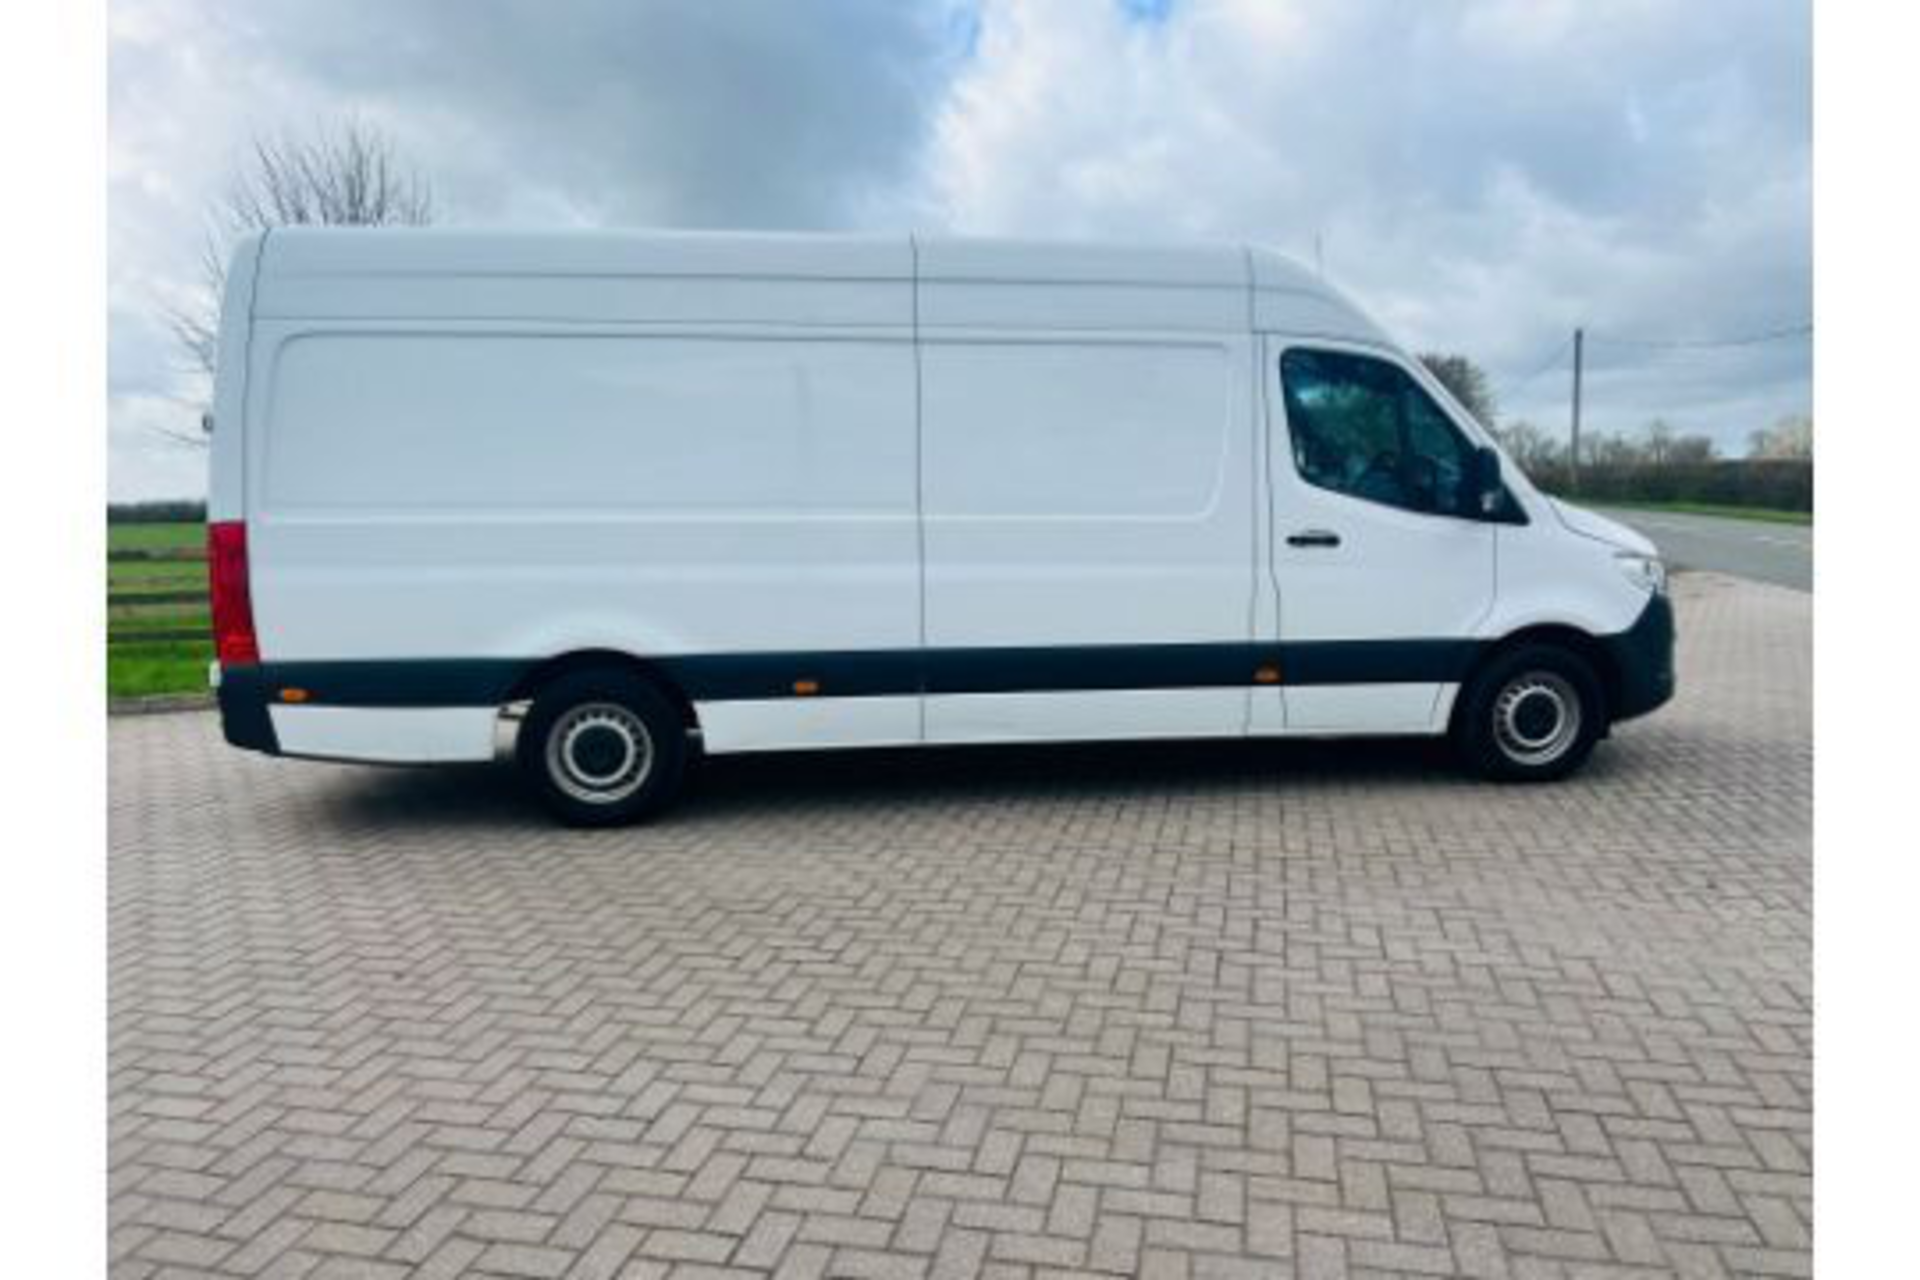 (Reserve Met) Sprinter 315Cdi Lwb High Roof 70 Reg - 1 Owner - Euro 6 - Only 60K Miles From New FSH - Image 2 of 5